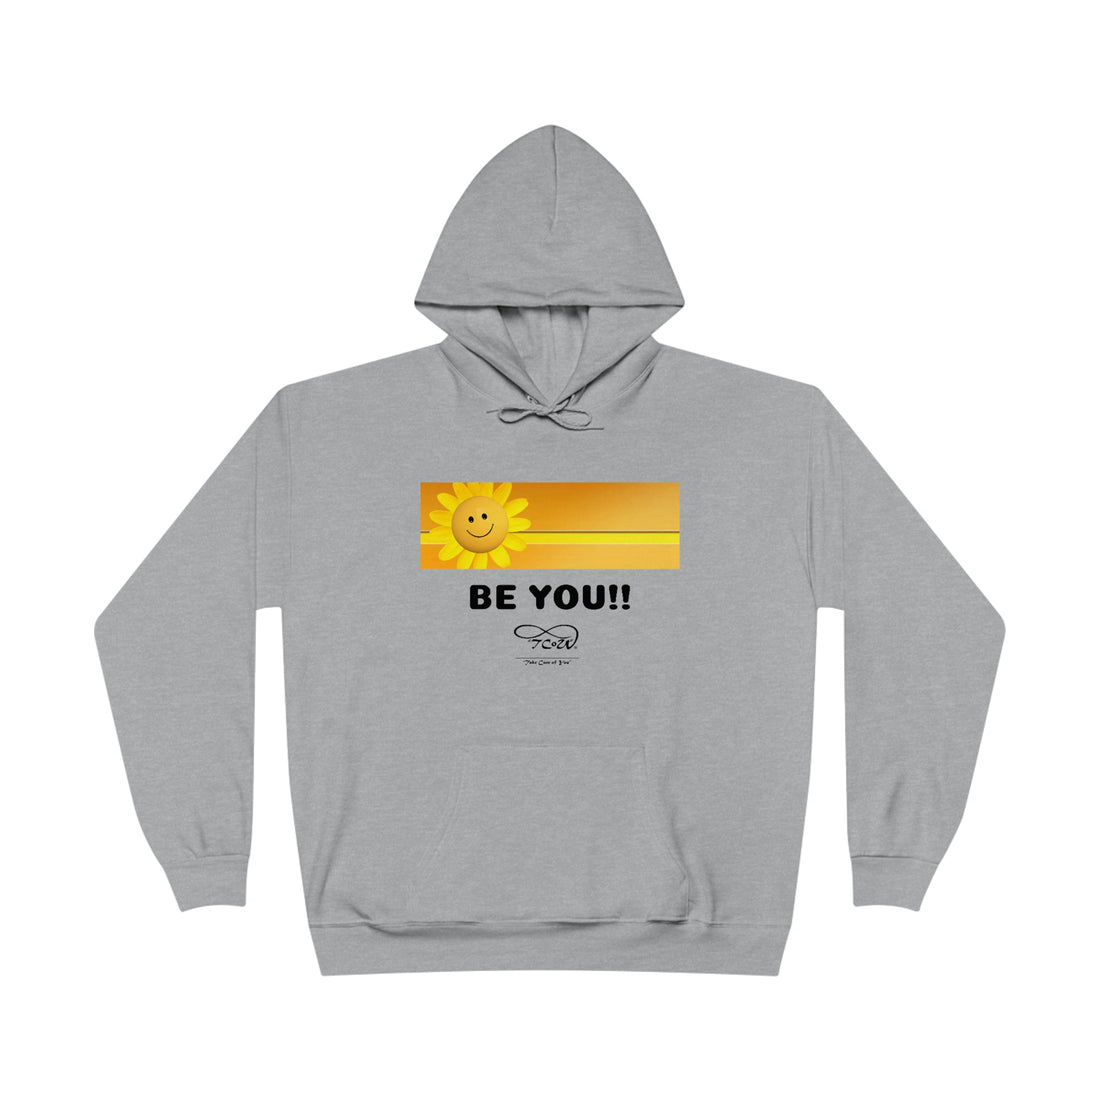 Be You and Find Your Happy!! Pullover Hoodie Sweatshirt